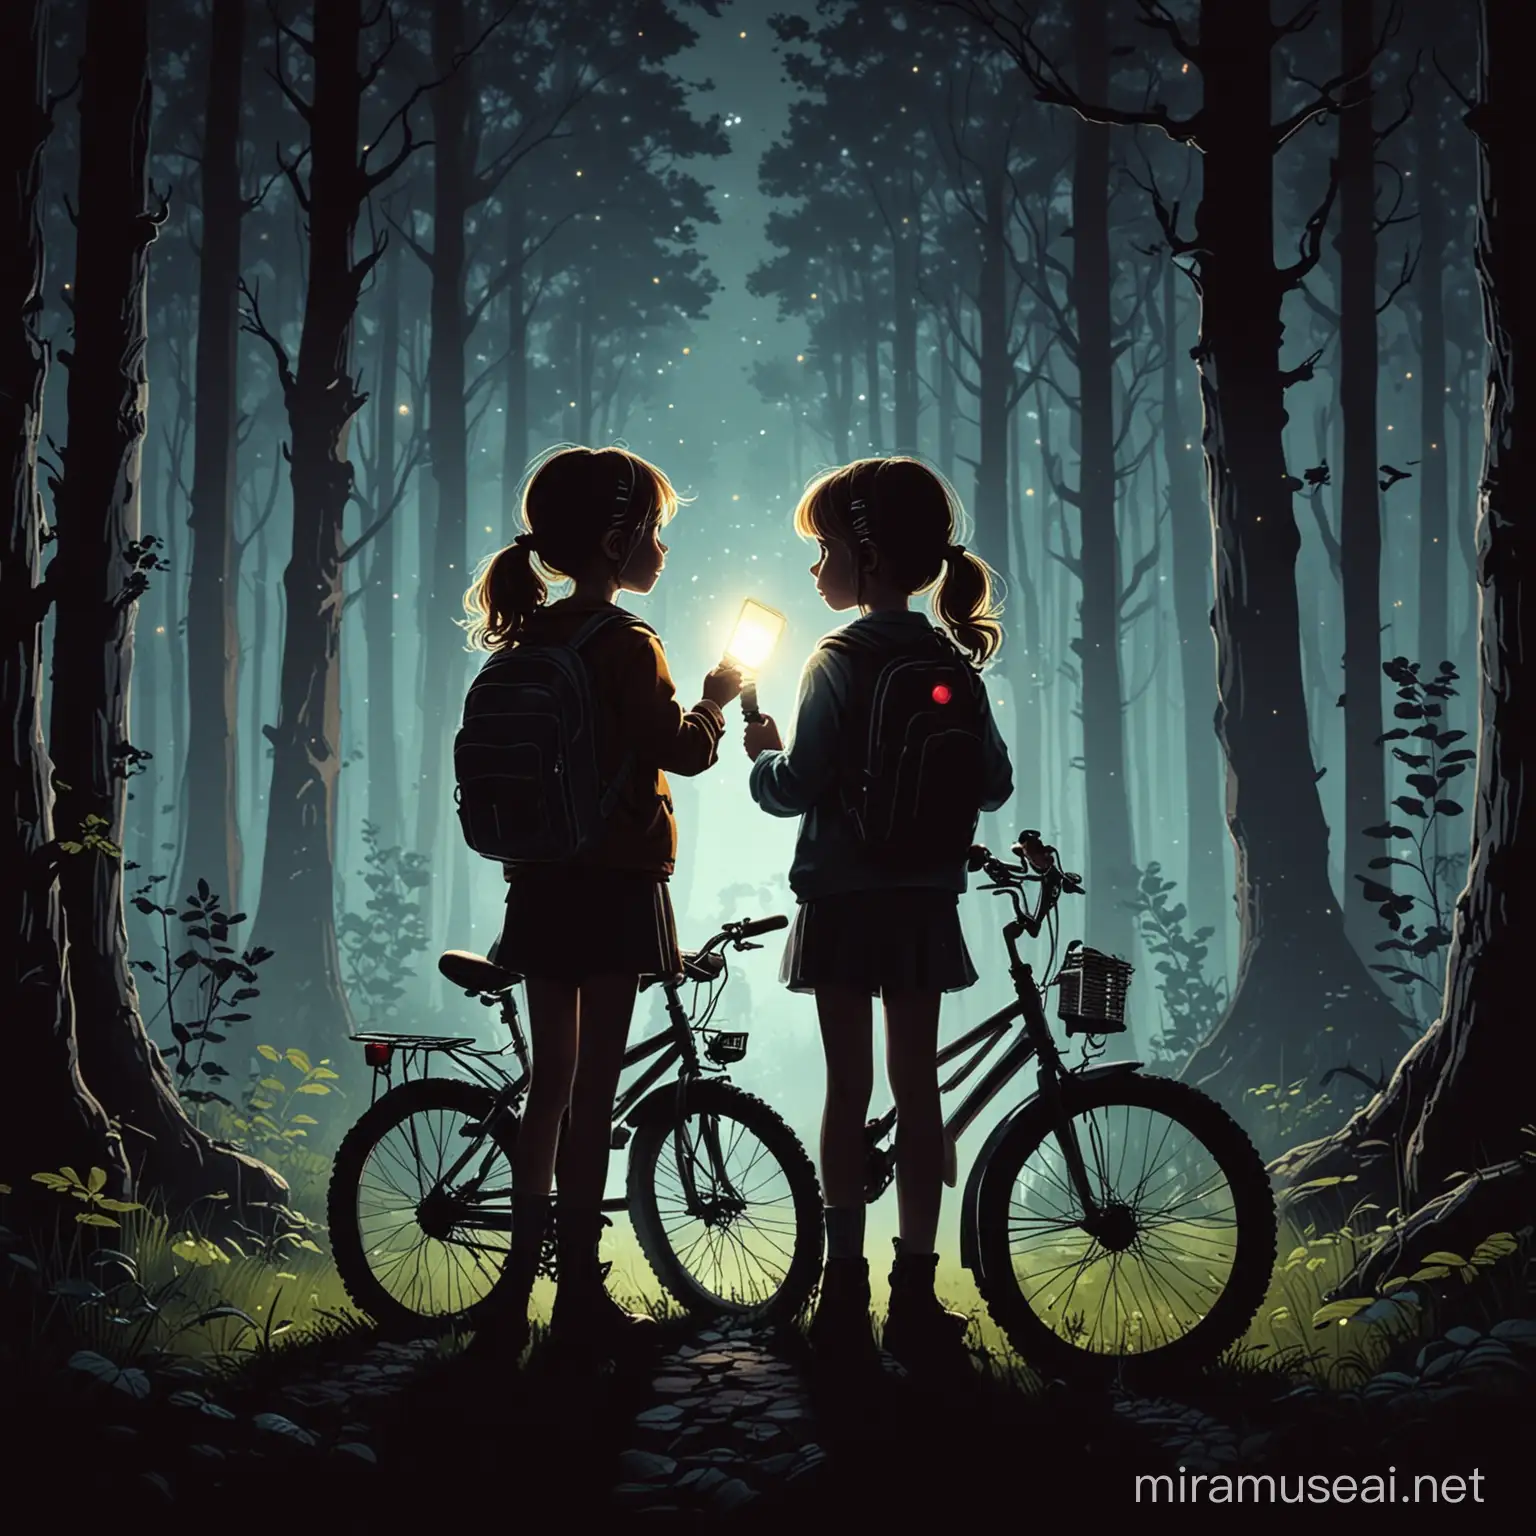 Childrens Adventure in Silhouette with Bikes and Flashlights